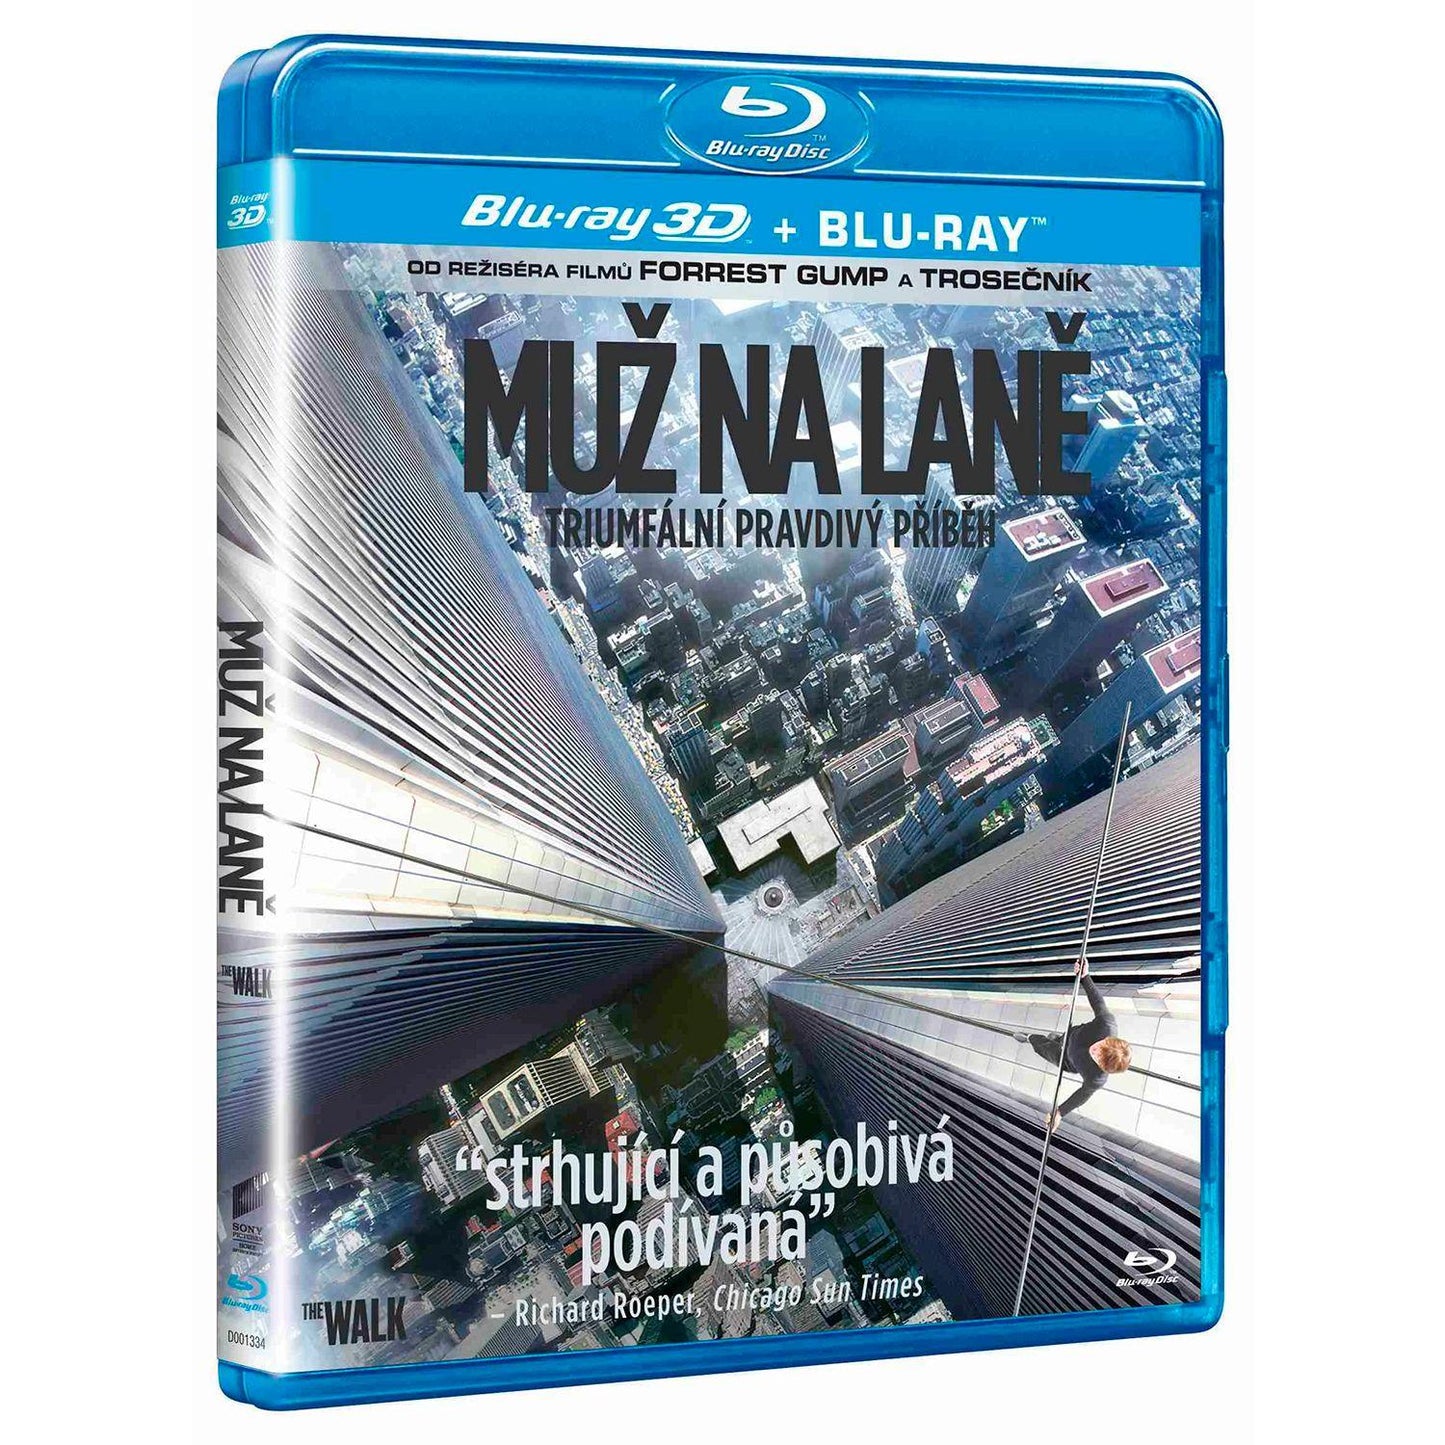 Прогулка 3D + 2D (2 Blu-ray)